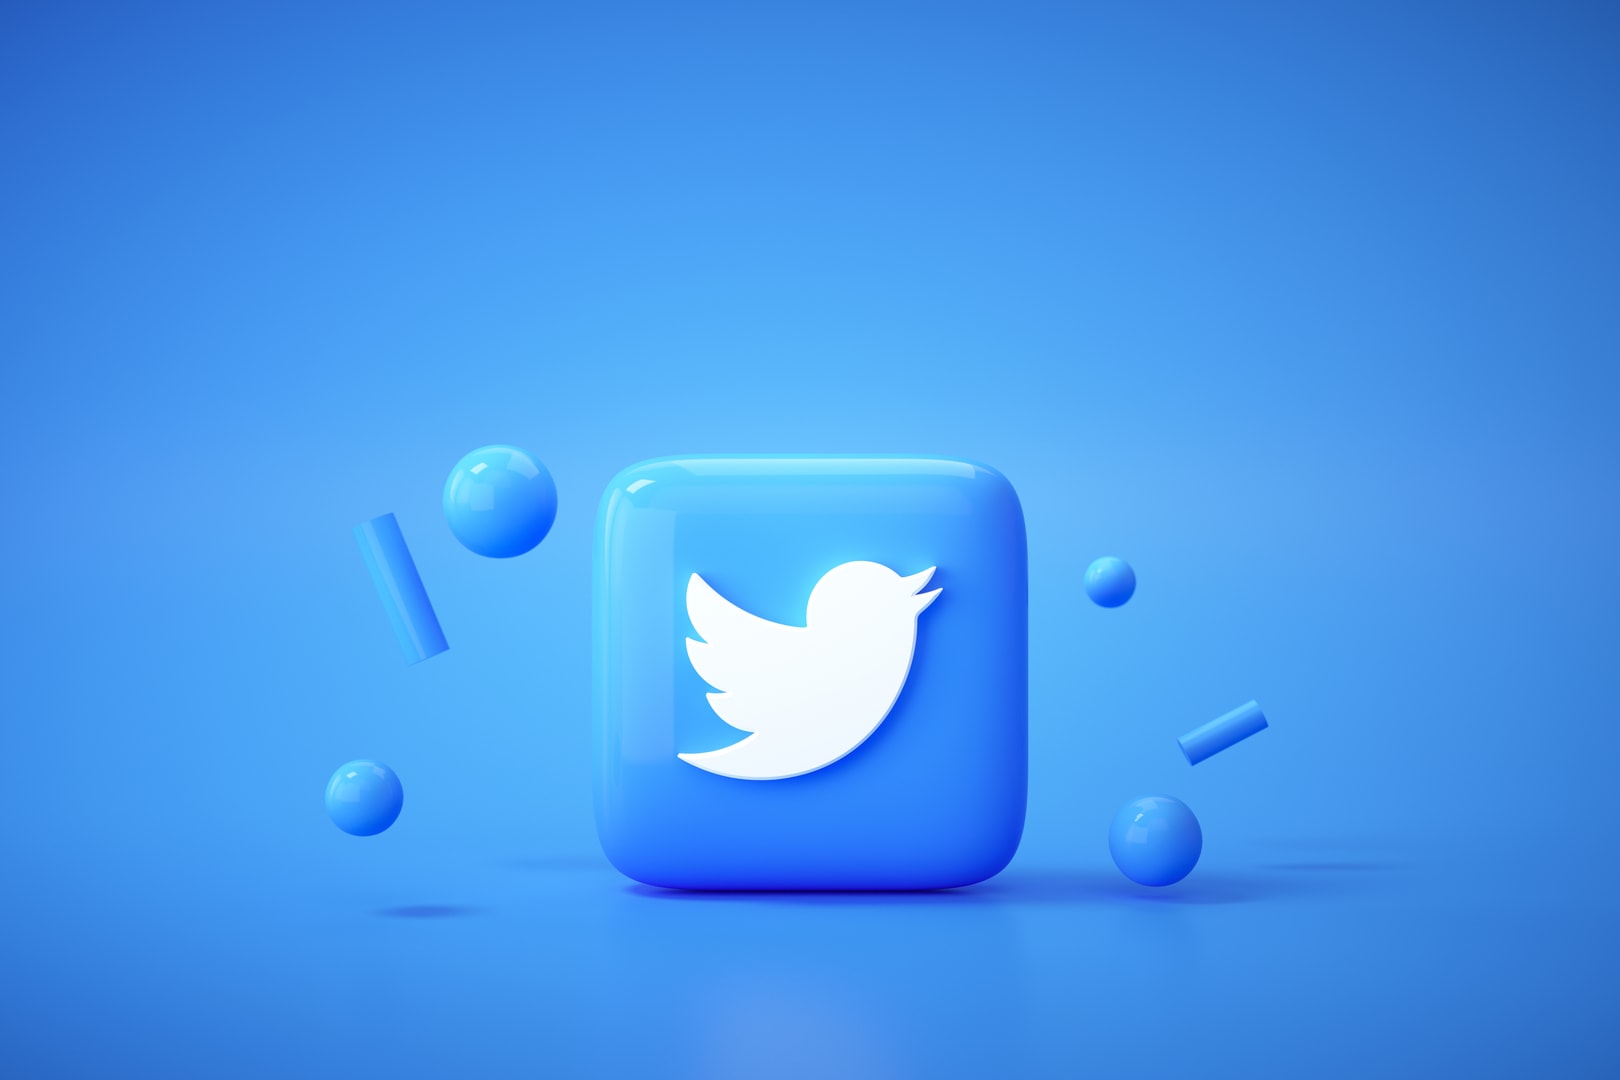 How To Make Your Startup Go Viral On Twitter